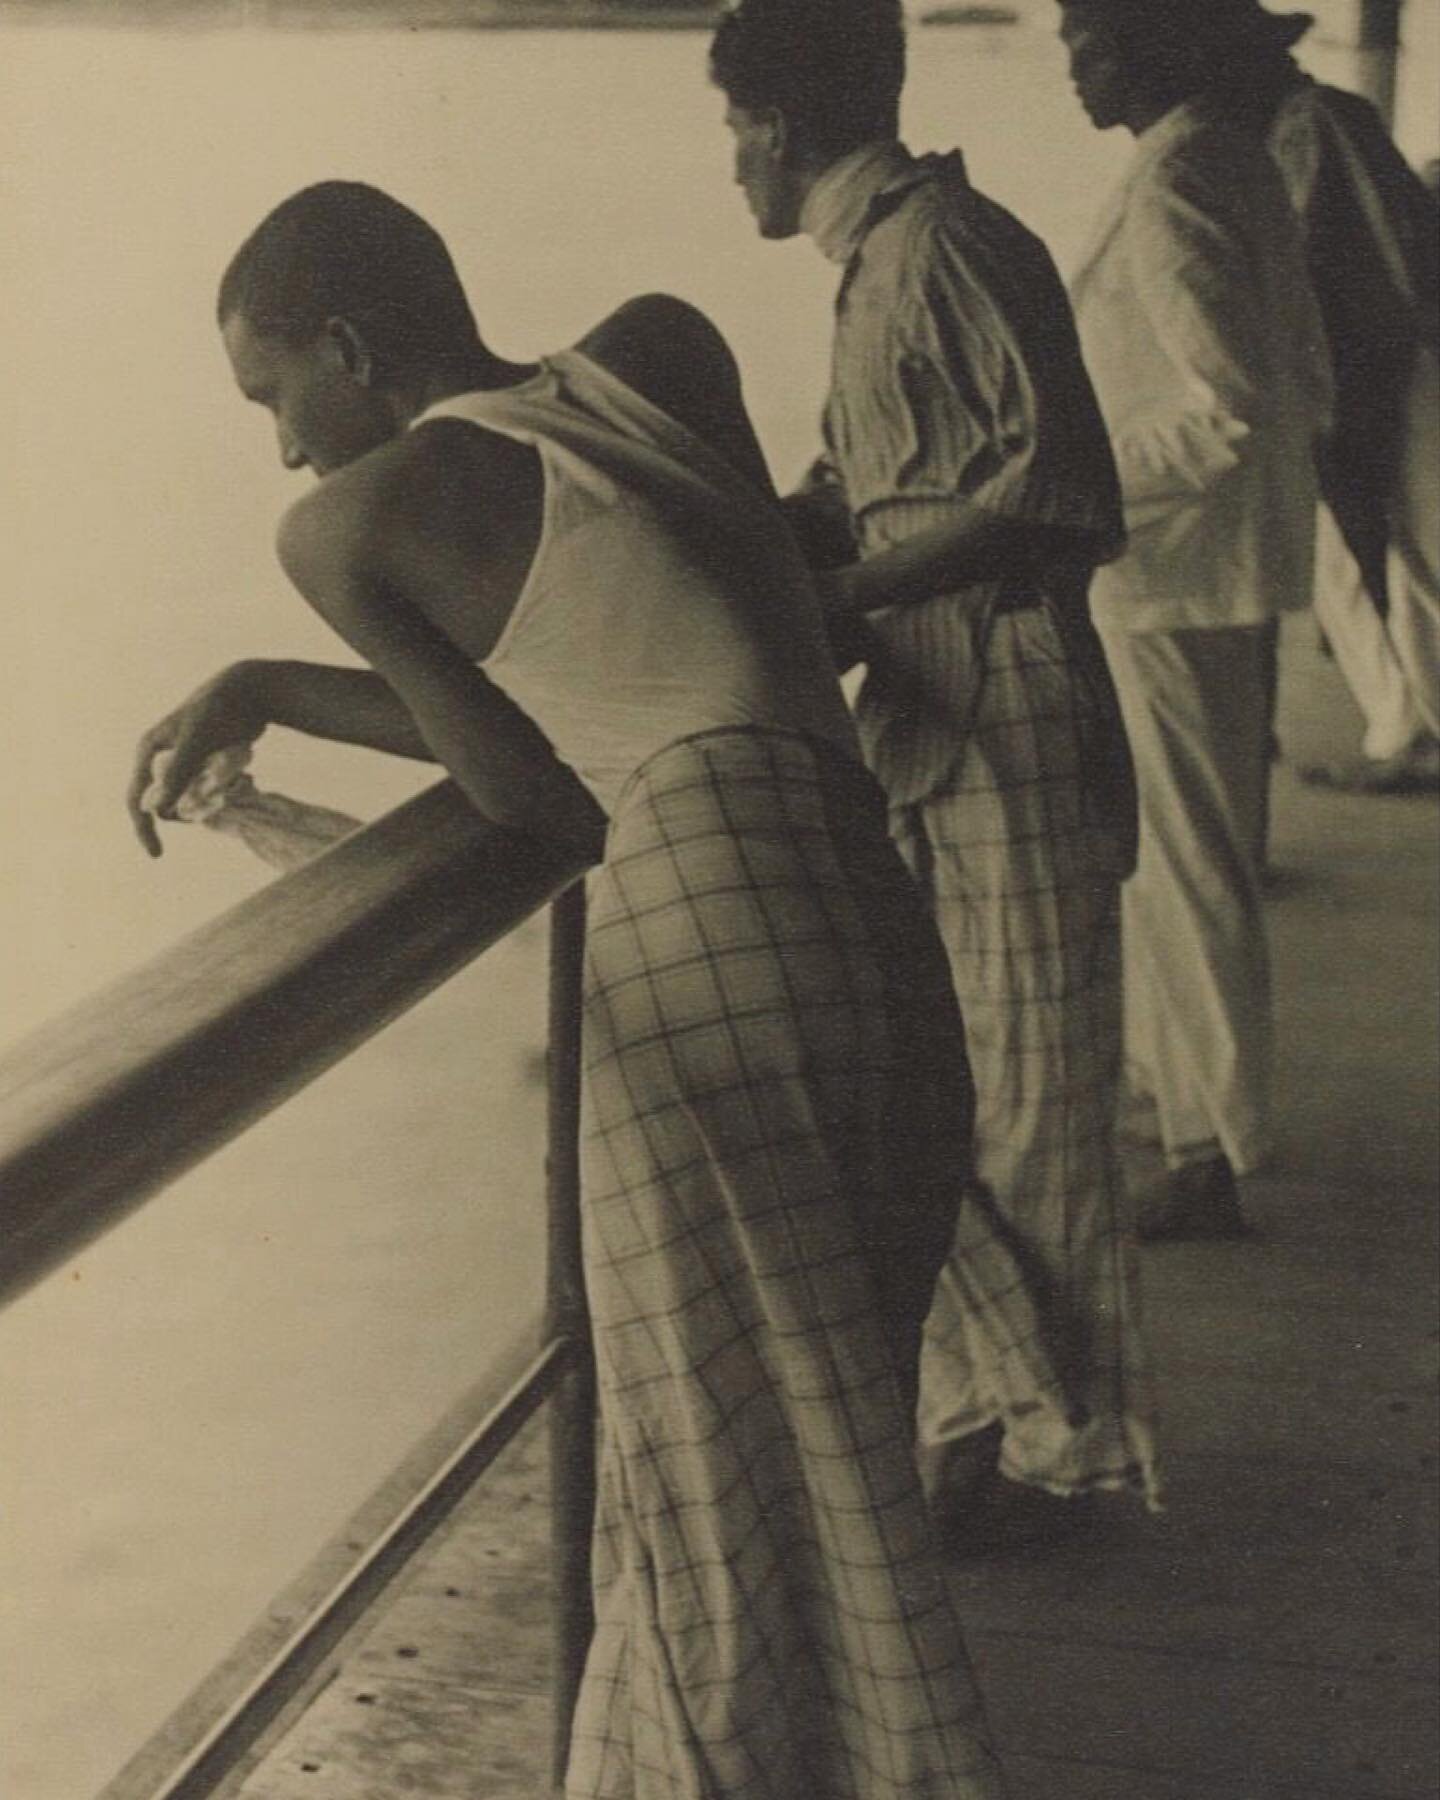 📷 Untitled (Four Men on a Deck), circa 1930-44, gelatin silver print by Sinhalese photographer Lionel Wendt via @jhavericontemporary

#monsoonmalabar #lionelwendt #jhavericontemporary #sinhalesephotographer #sinhalese #photographer #documentaryphoto